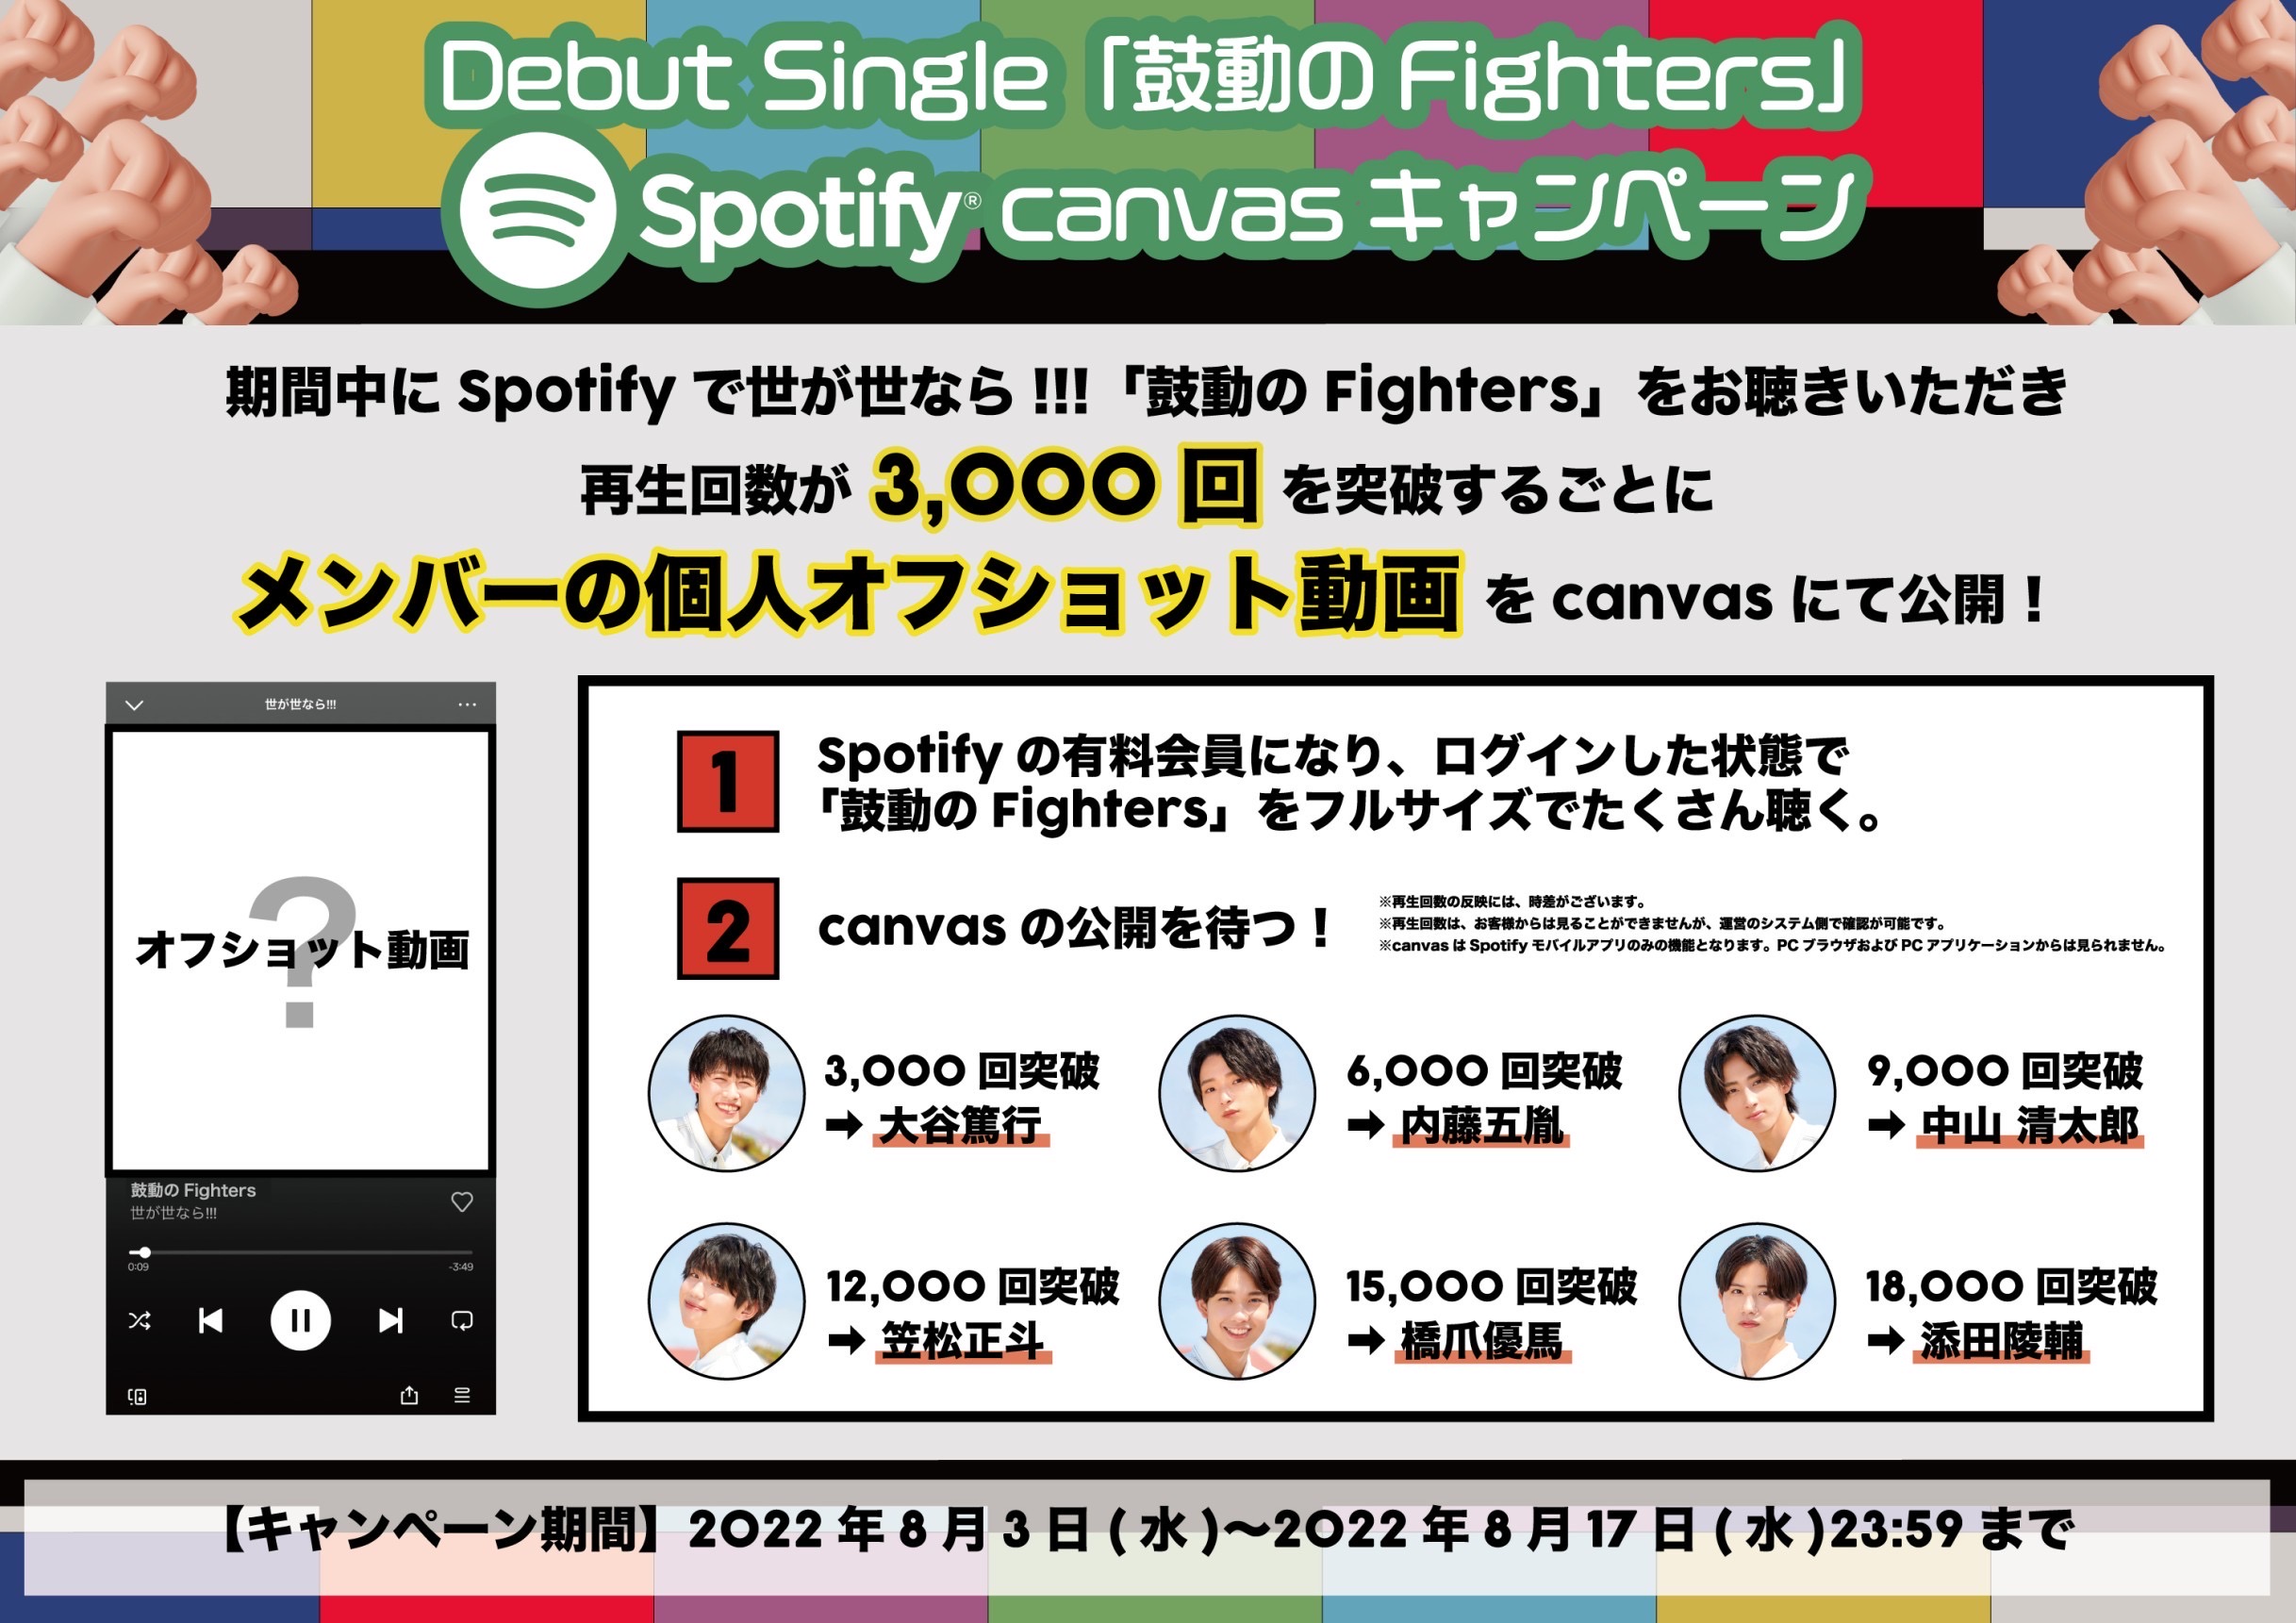 【NEWS】Debut Single「鼓動のFighters」Spotify canvasキャンペーン開催！